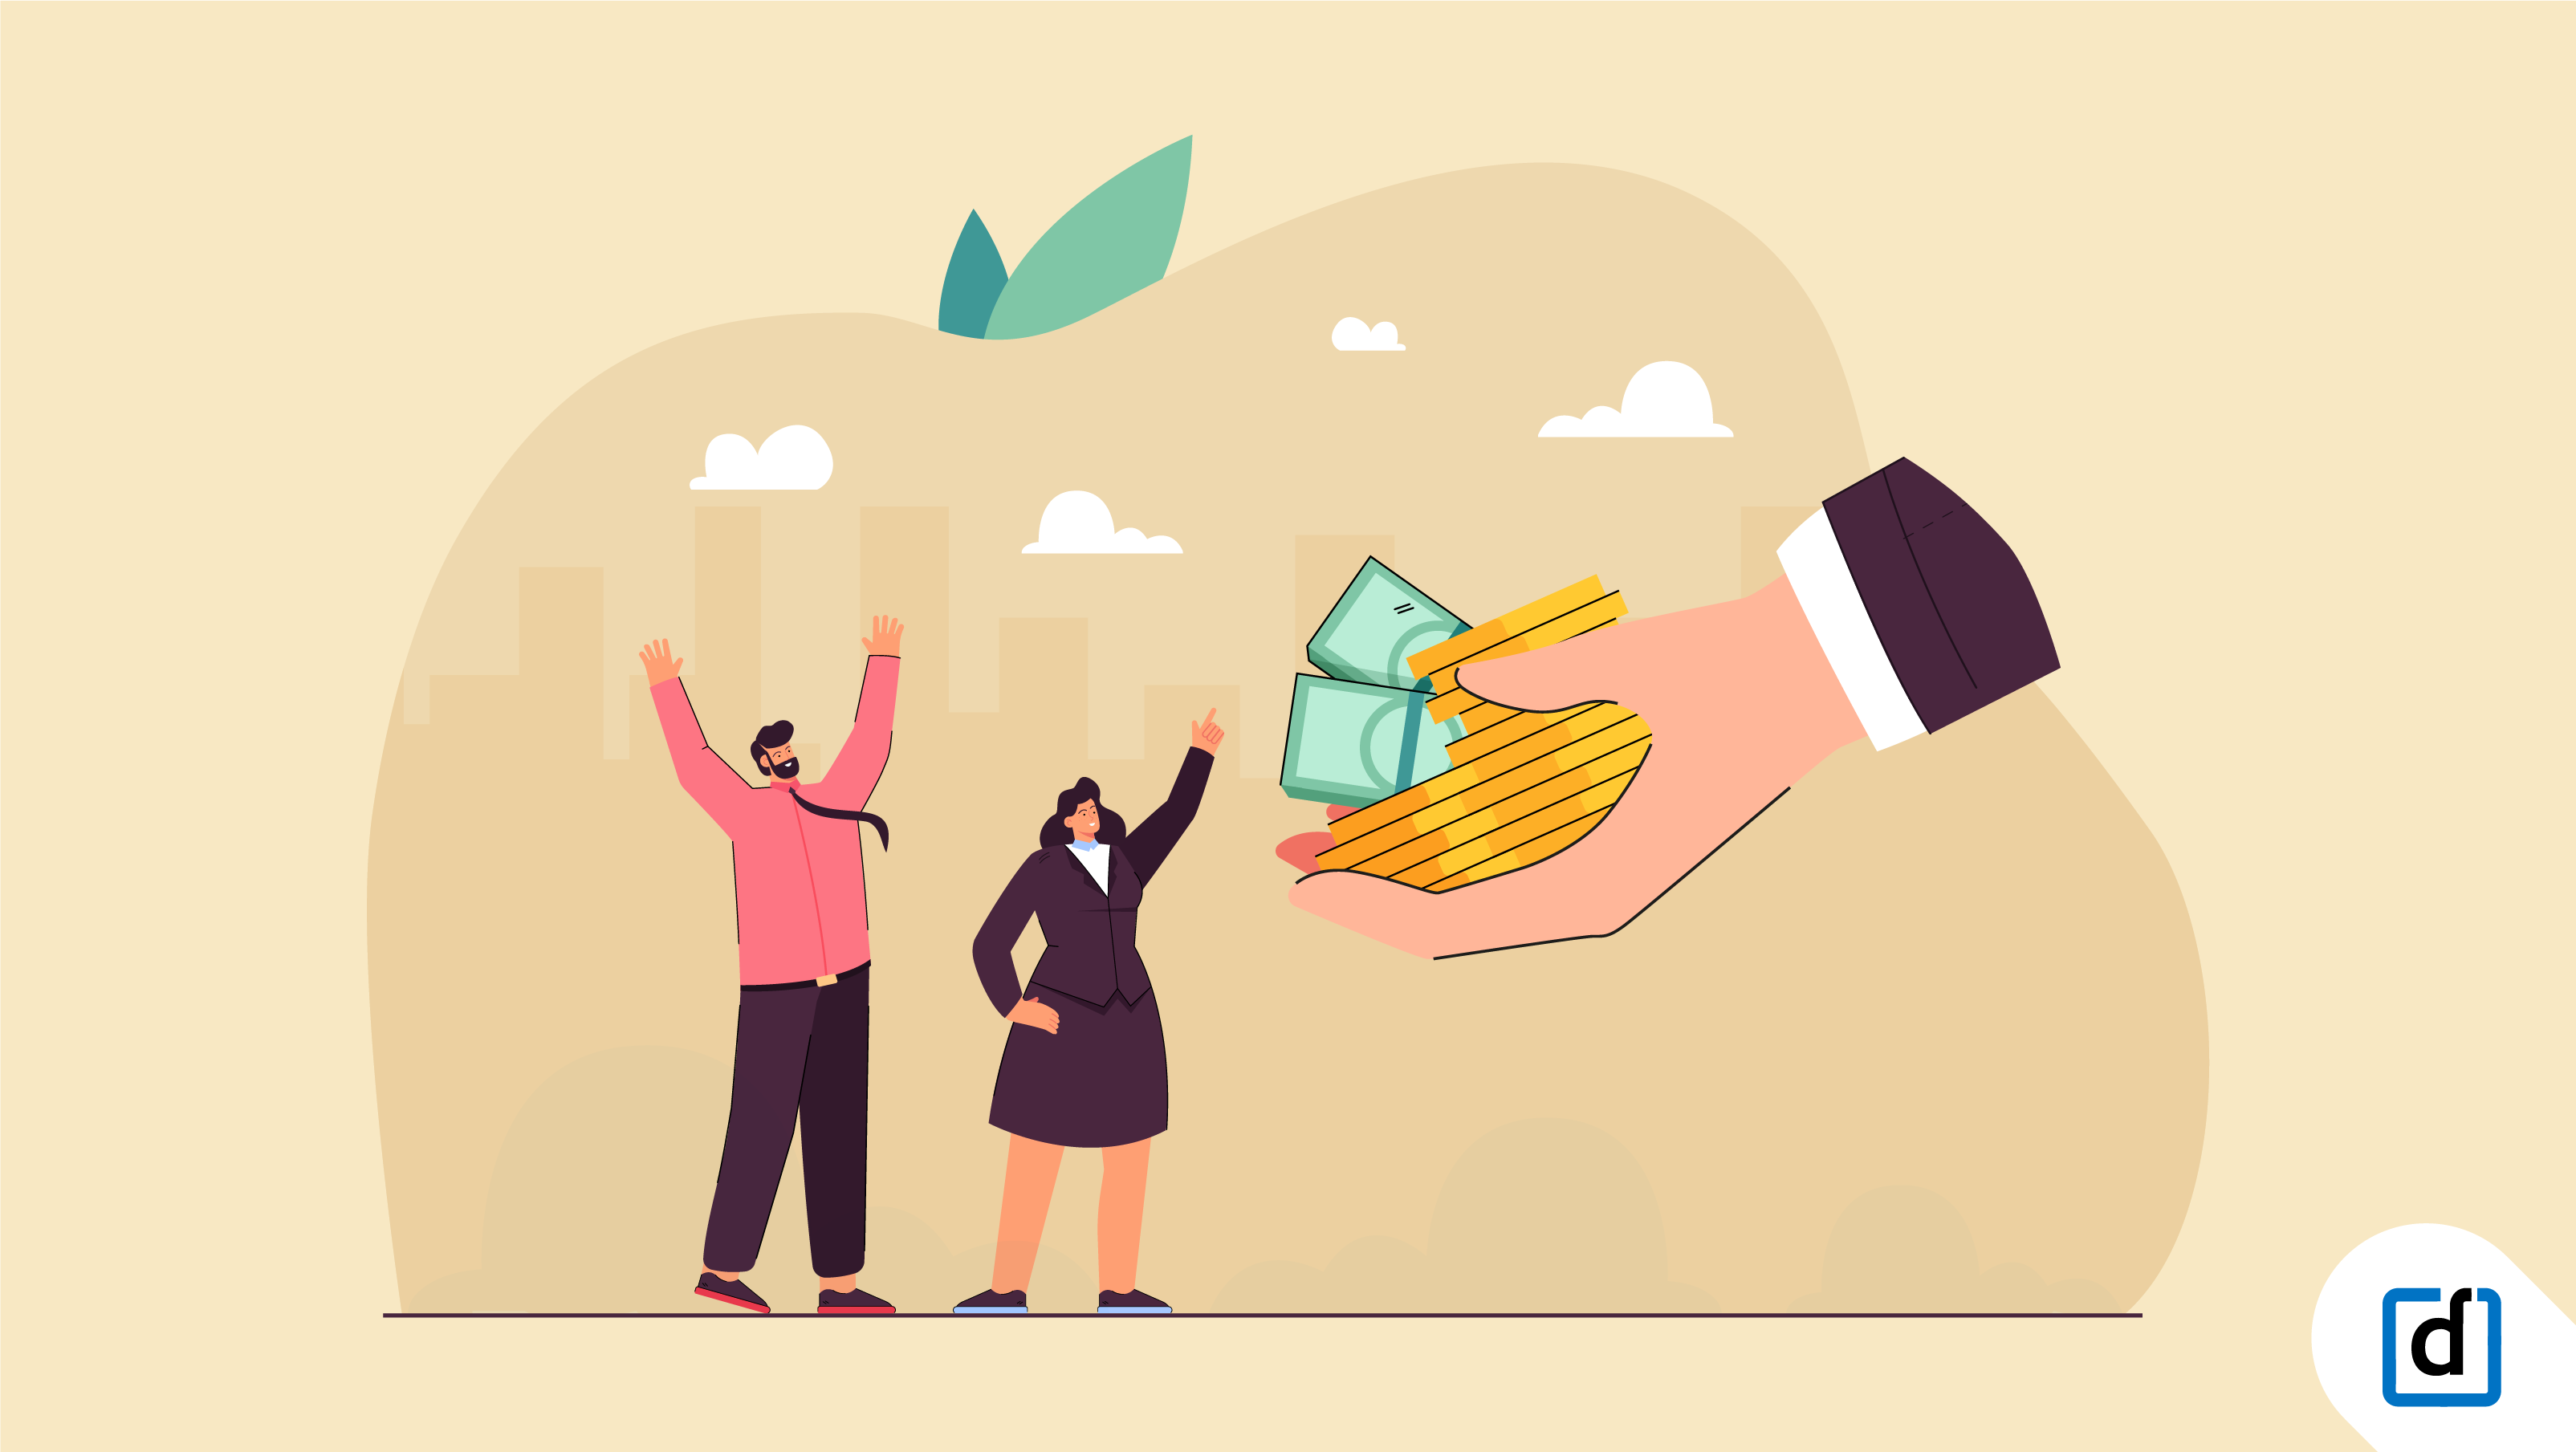 16 Types of Bonus Every Employee should be Entitled To